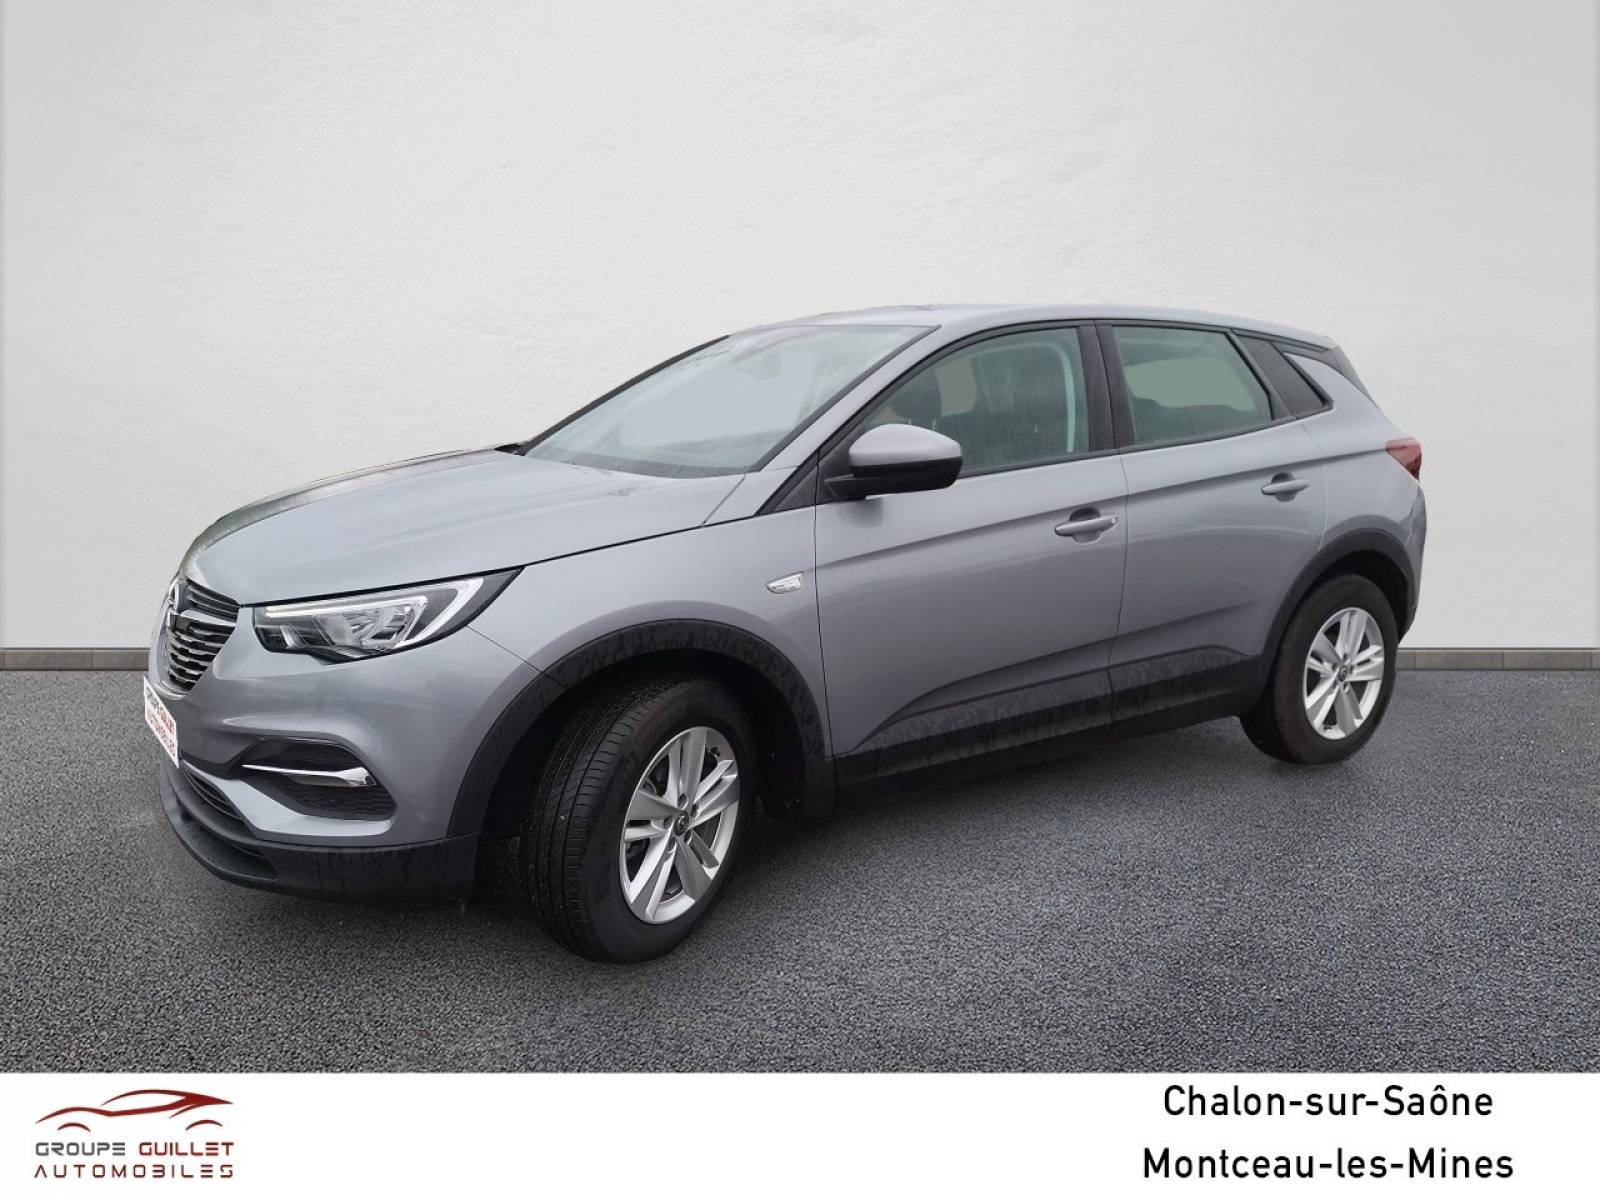 OPEL Grandland X 1.2 Turbo 130 ch - véhicule d'occasion - Groupe Guillet - Opel Magicauto Chalon - 71380 - Saint-Marcel - 1